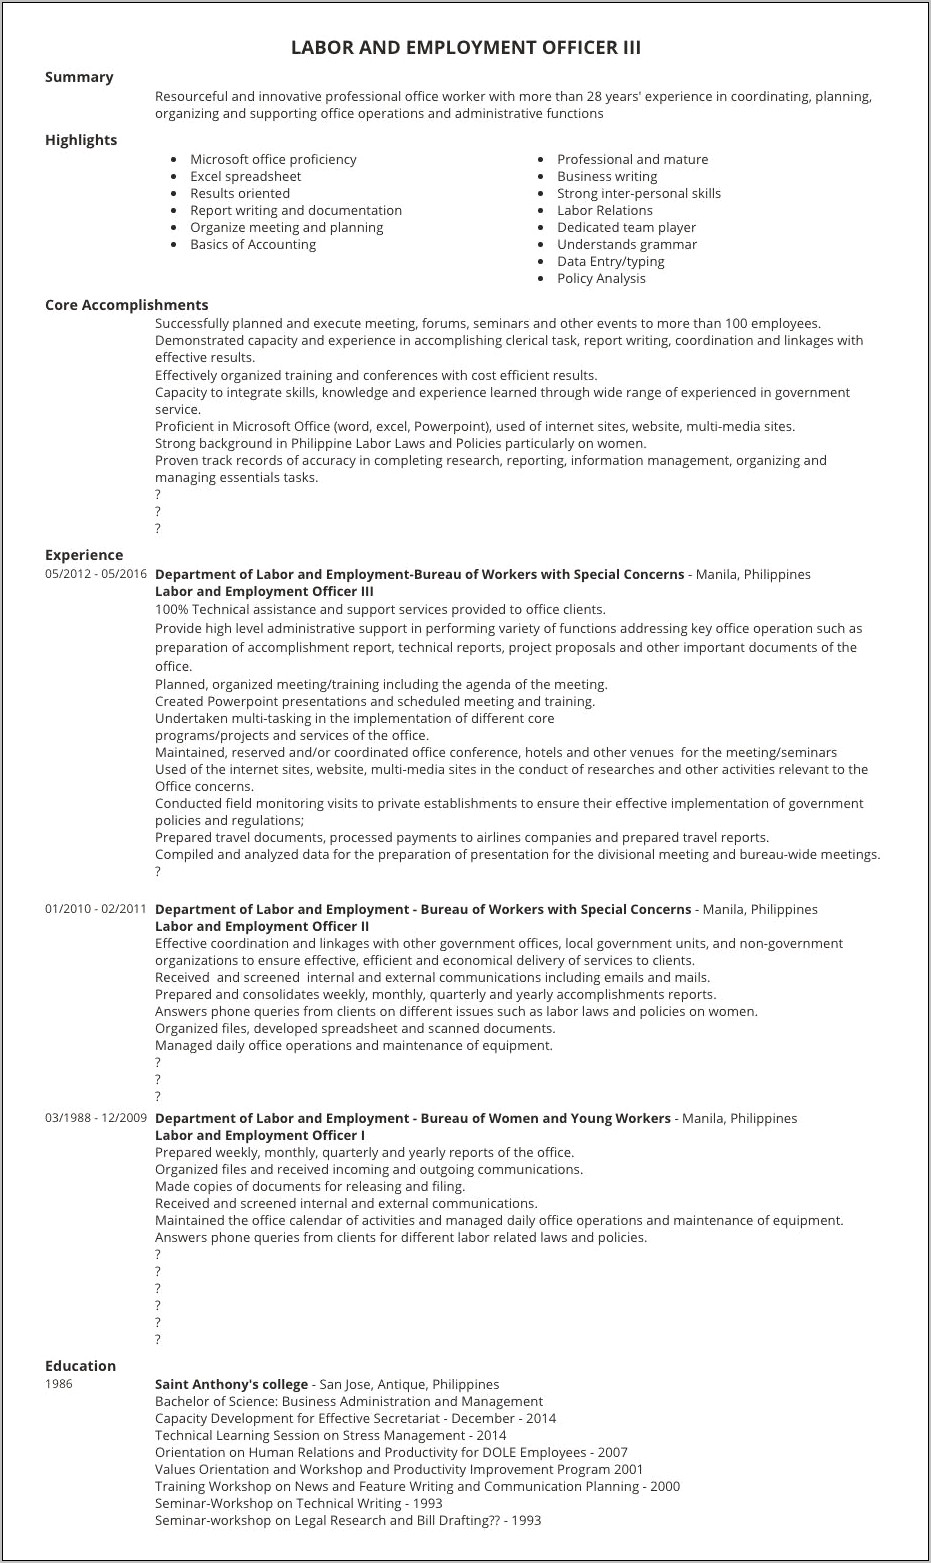 Sample Resume Objective Statement For Government